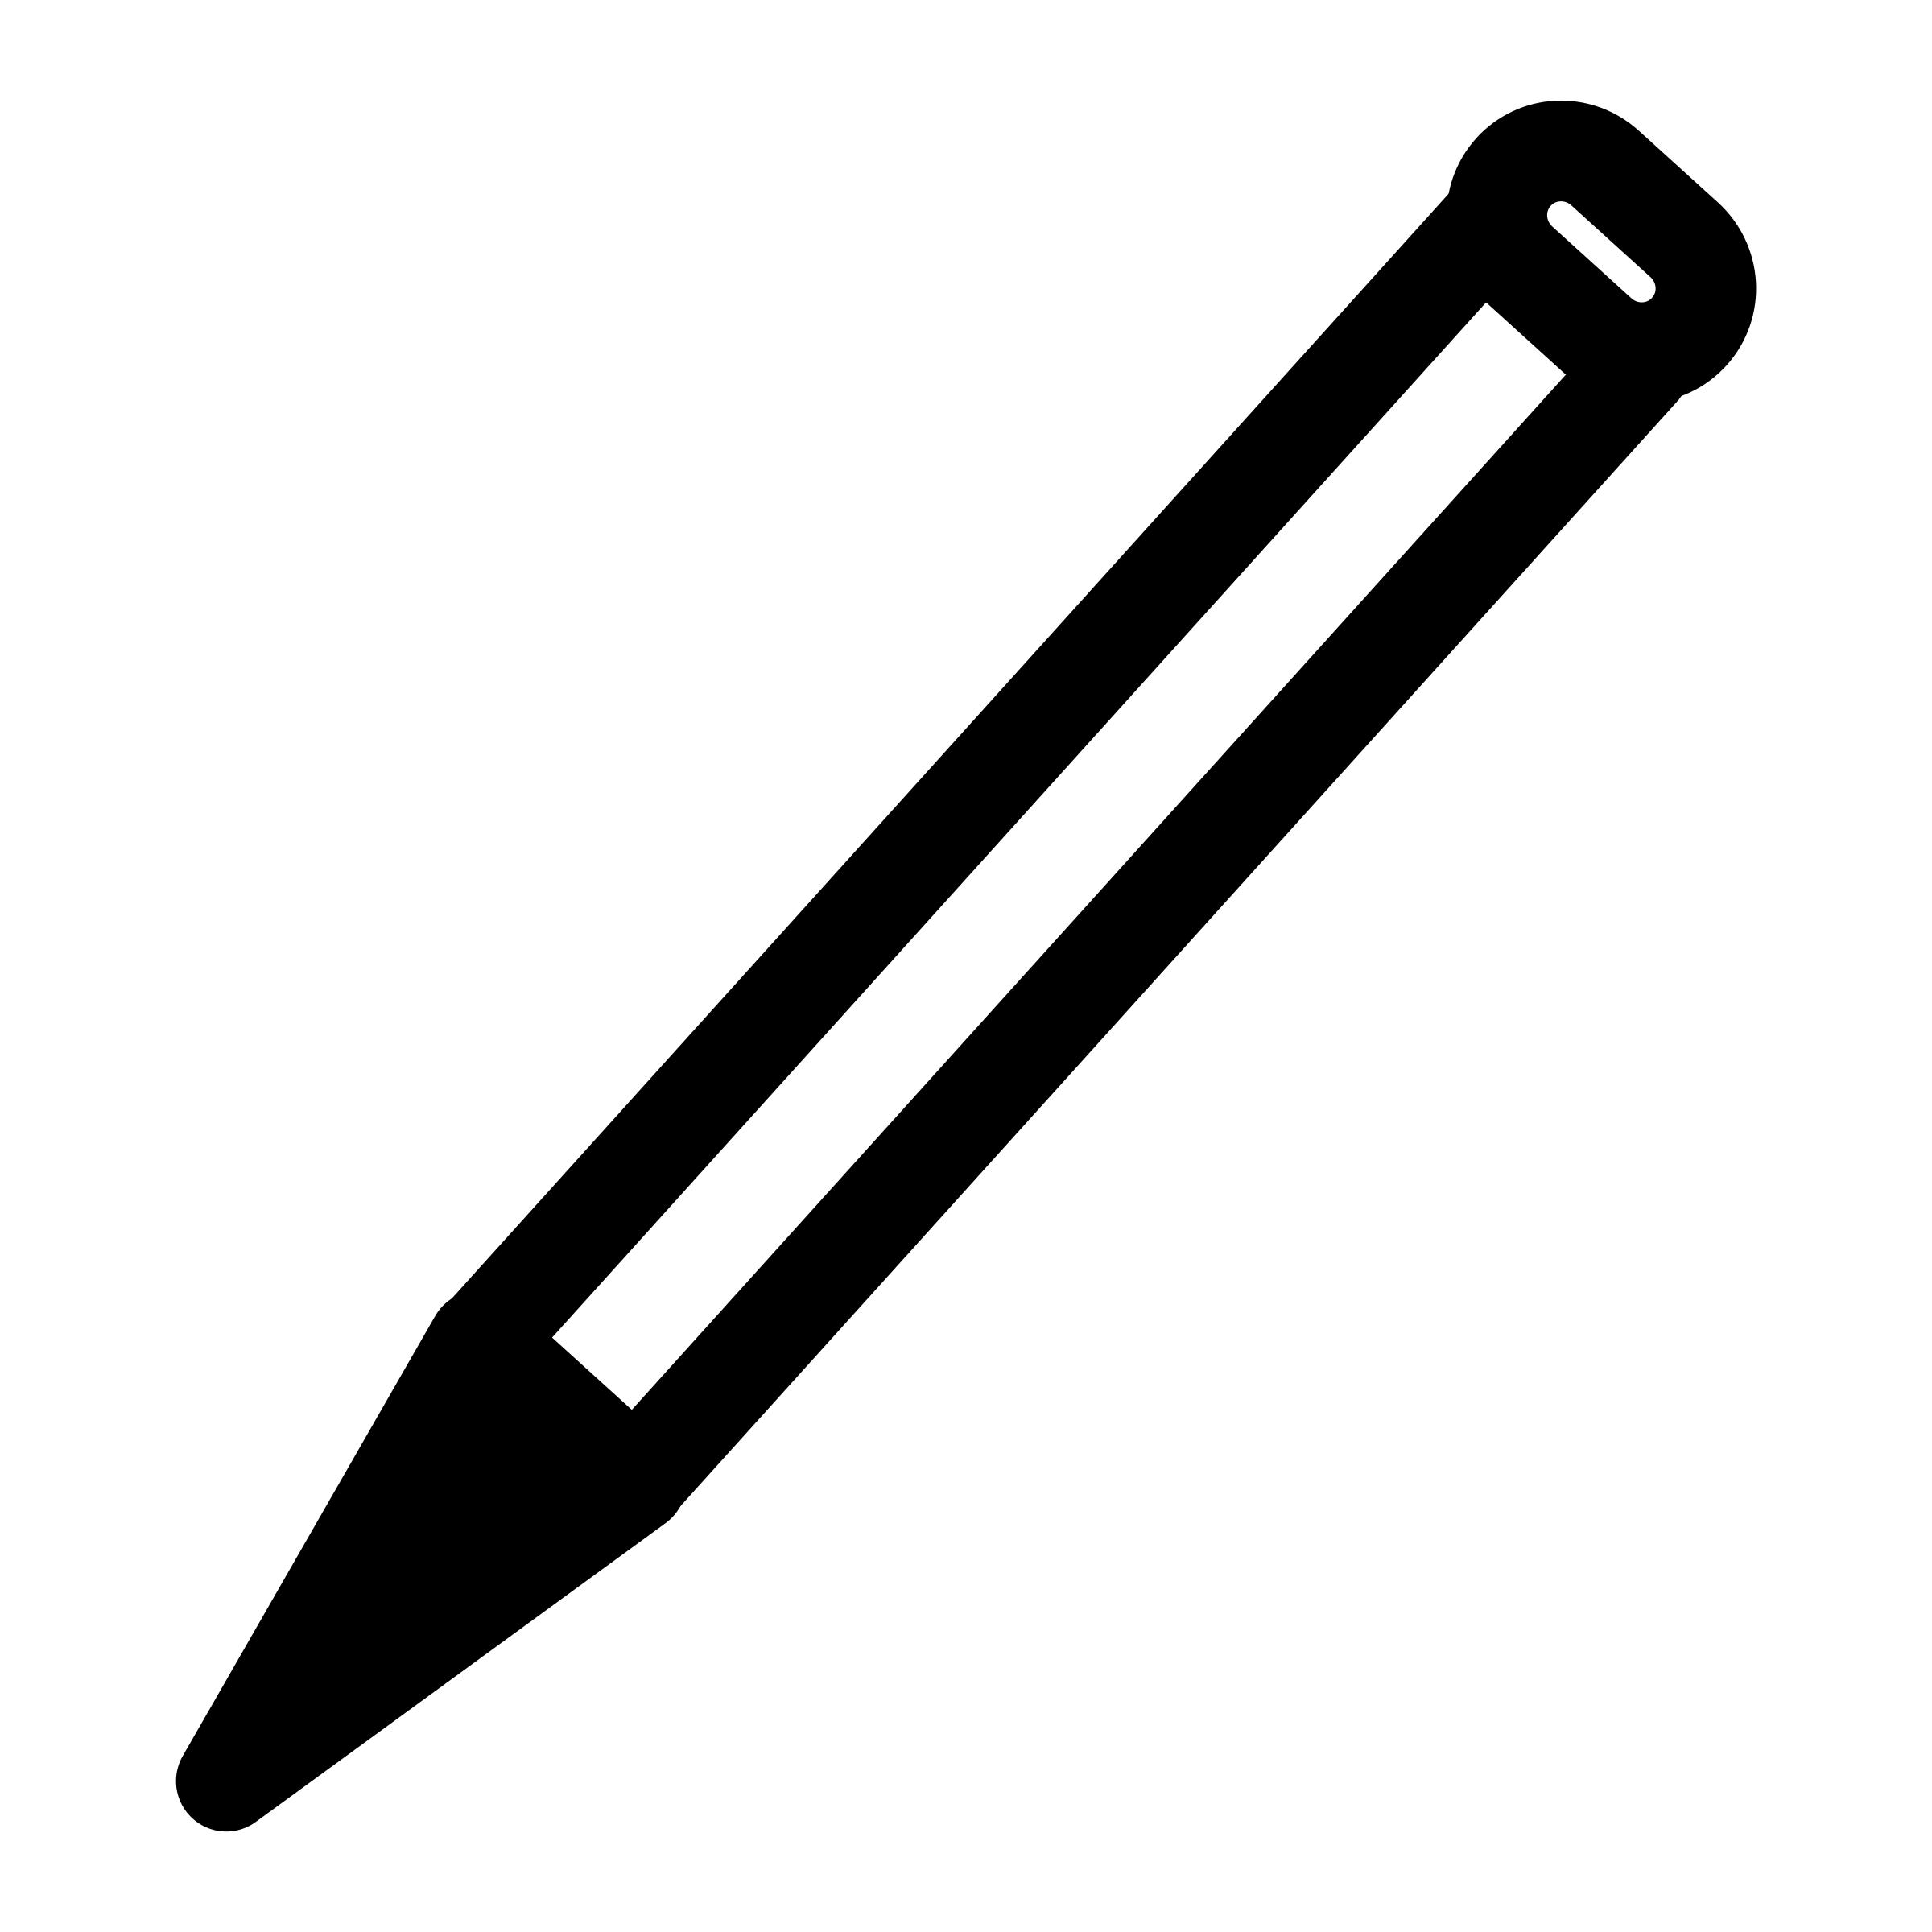 mono tool freehand png